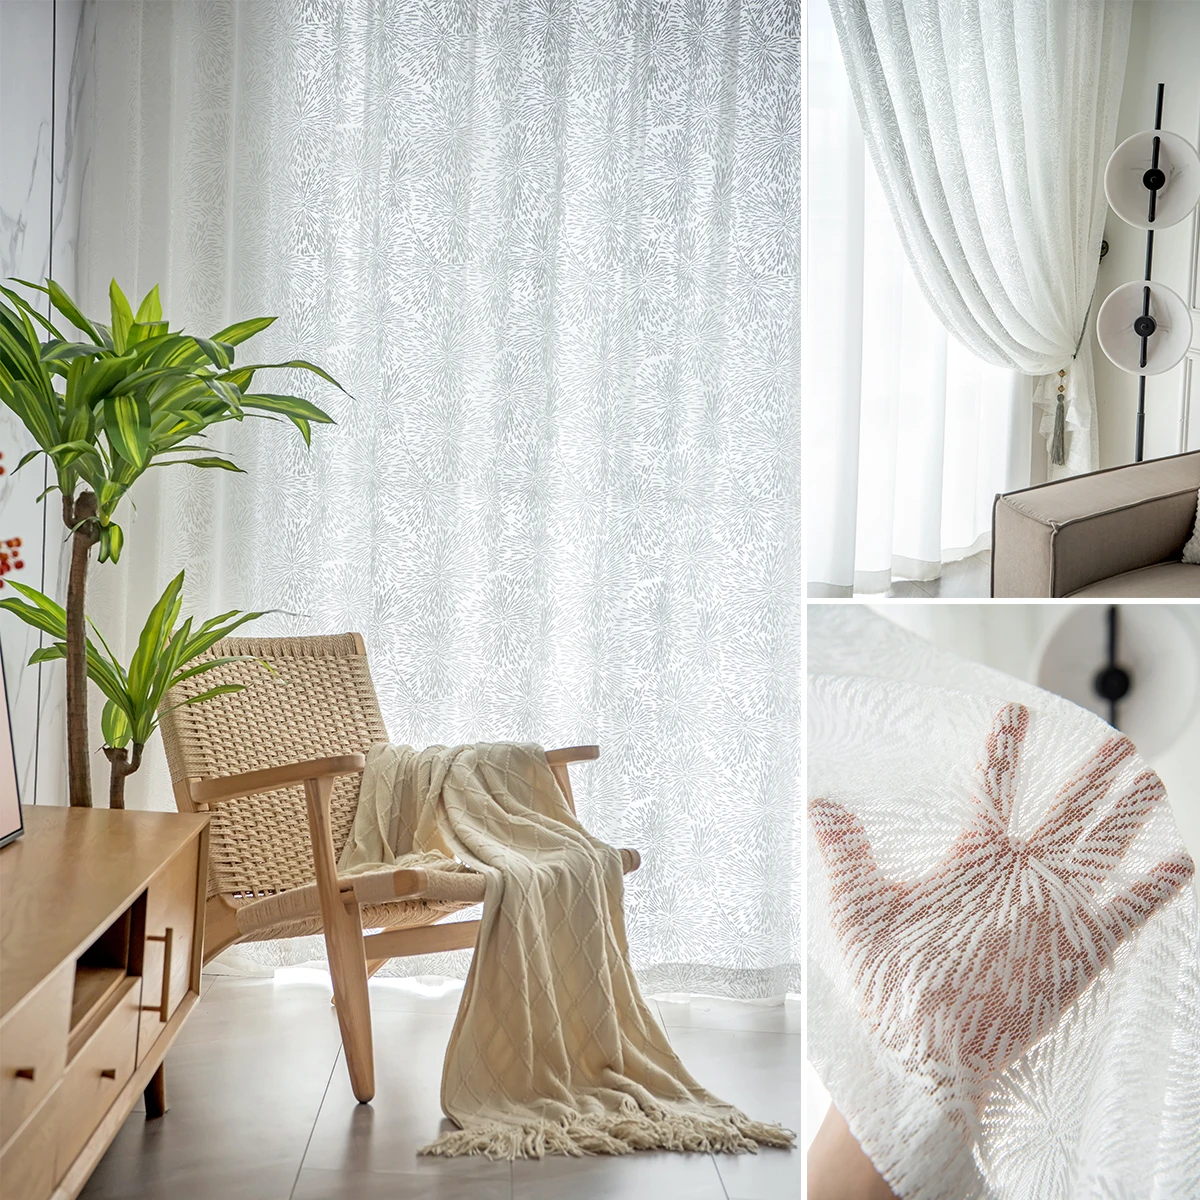 

Solid White Lace Sheer Curtain Home Window Drapes for Bedroom Curtains for Living Room Rod Pocket Elegant Sheer Screening Gauze